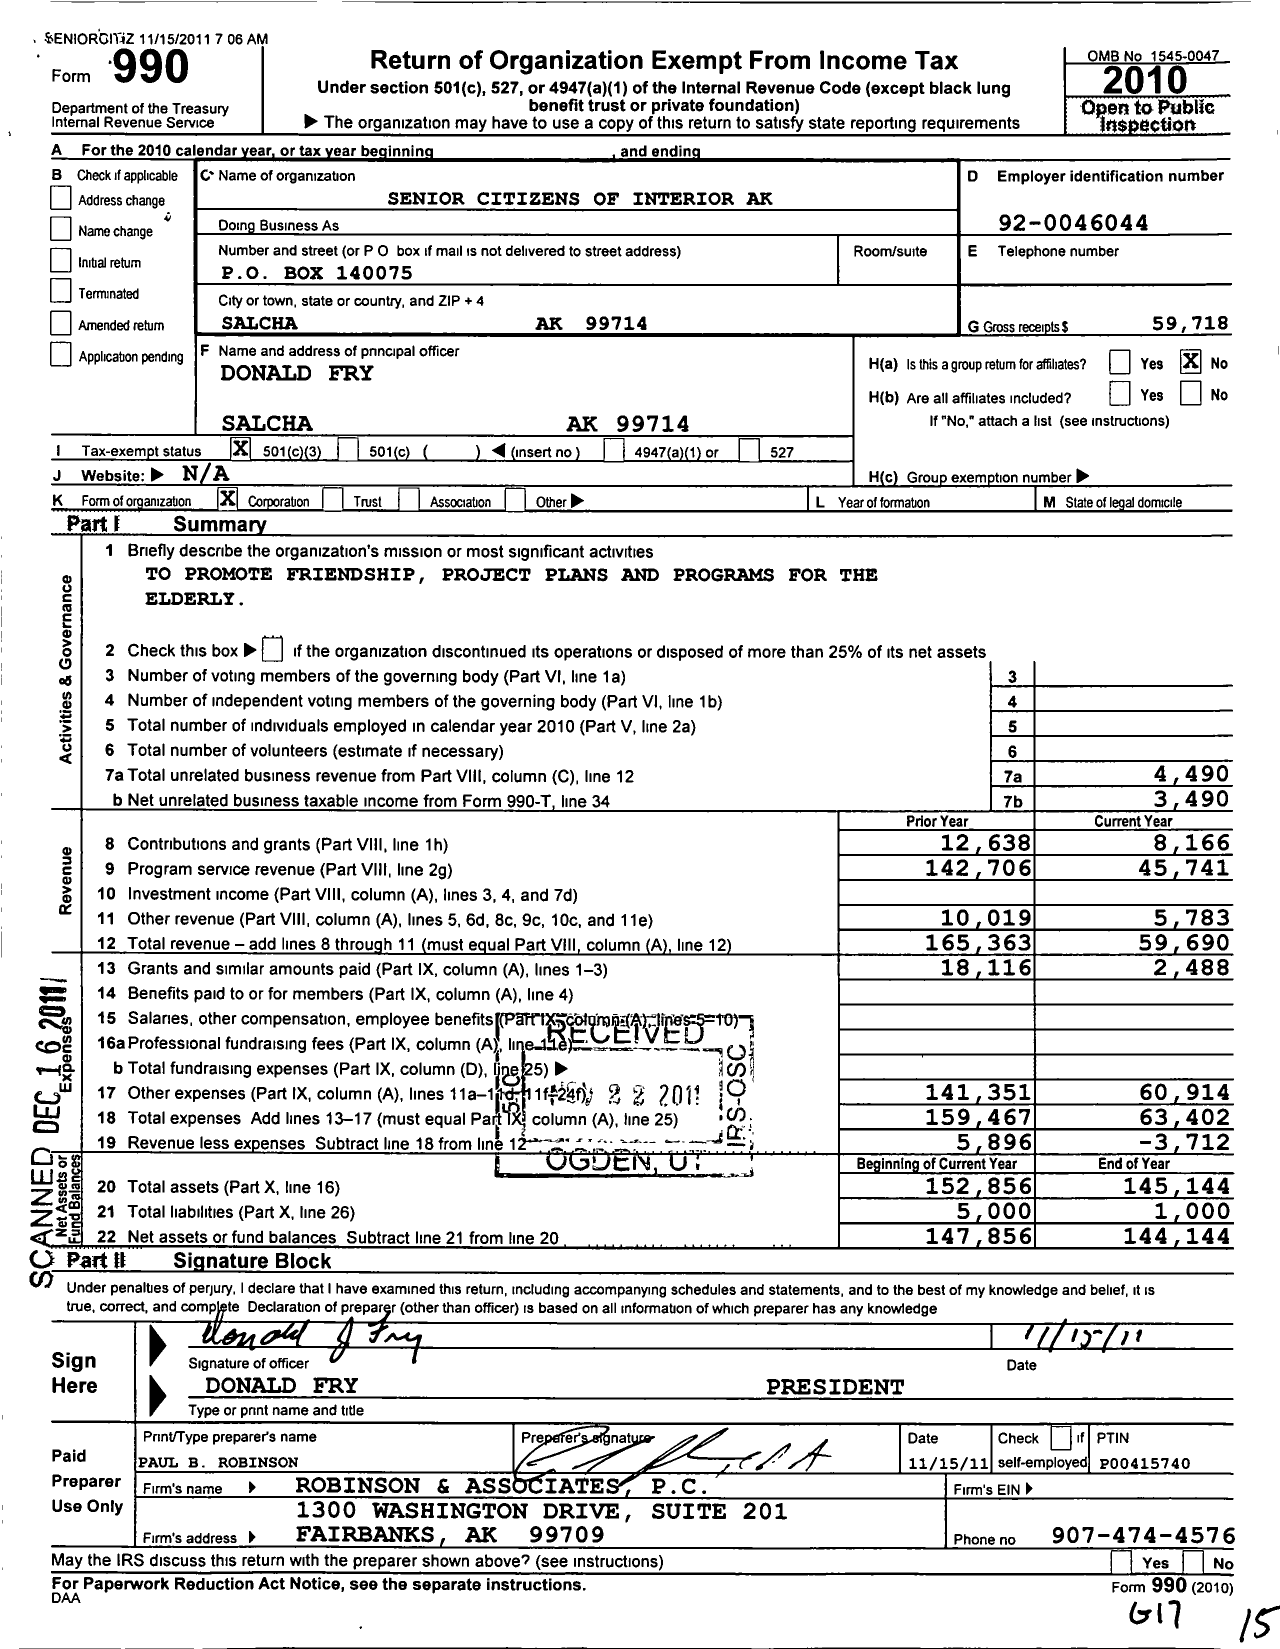 Image of first page of 2010 Form 990 for Senior Citizens of Interior Ak